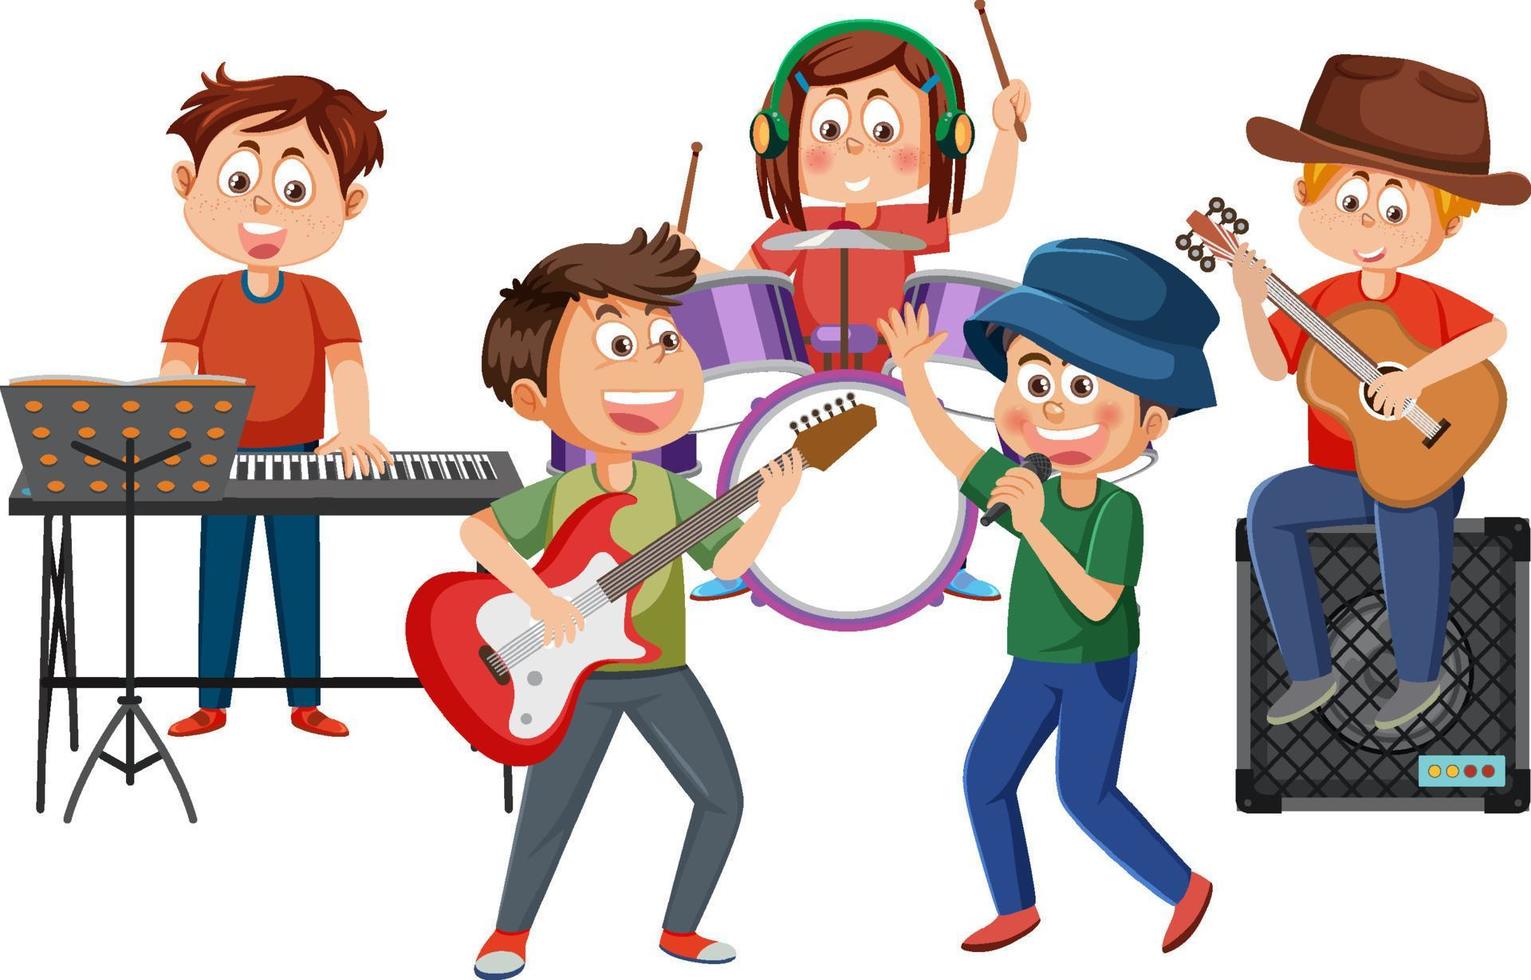 Kids playing musical instruments vector